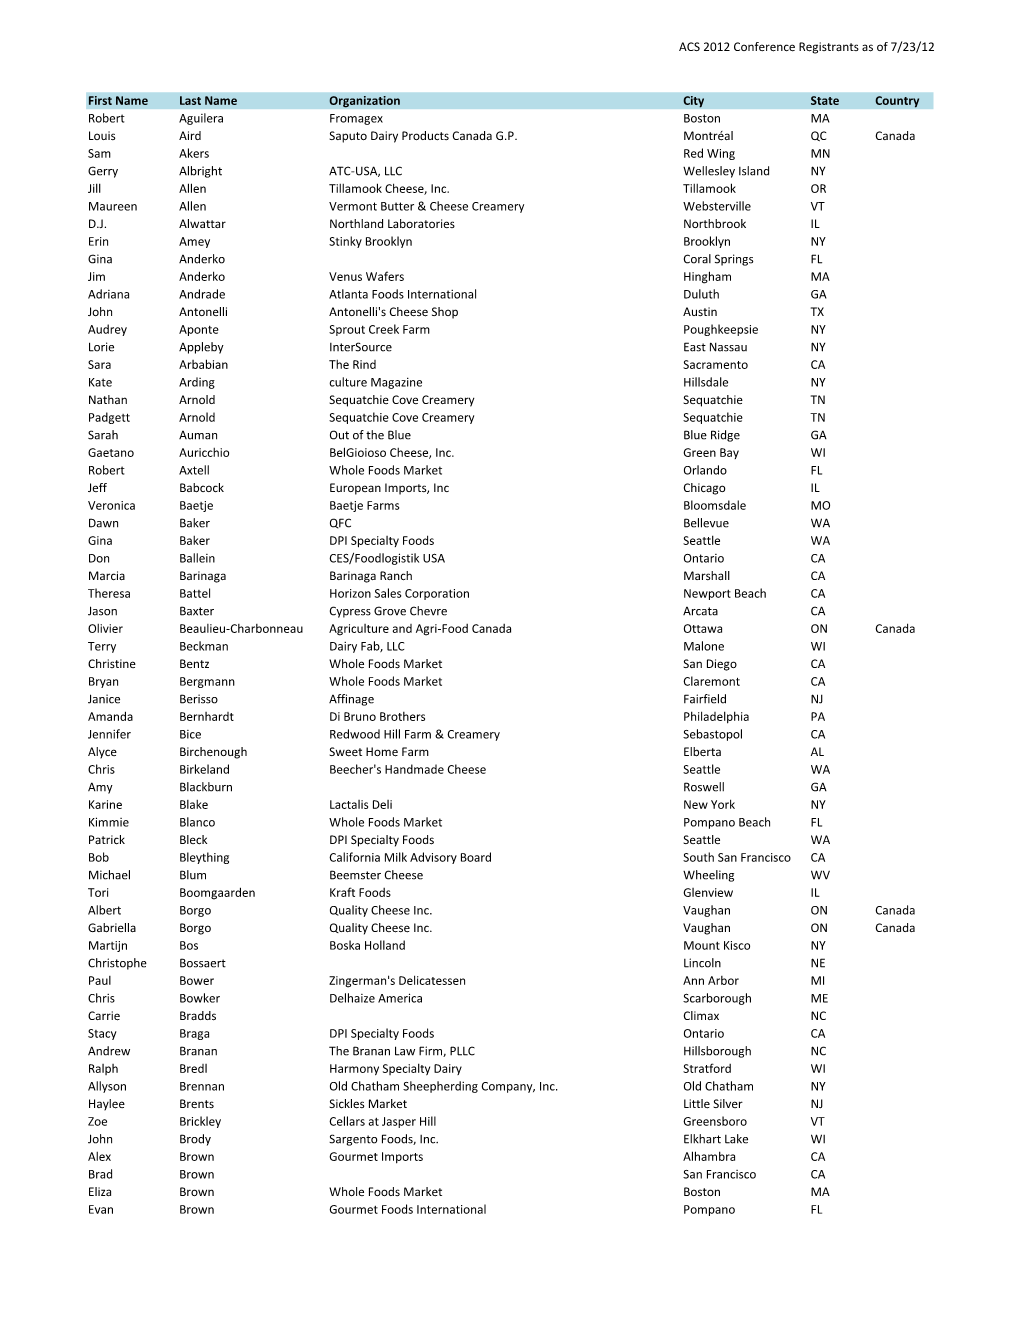 ACS 2012 Conference Registrants As of 7/23/12 First Name Last Name